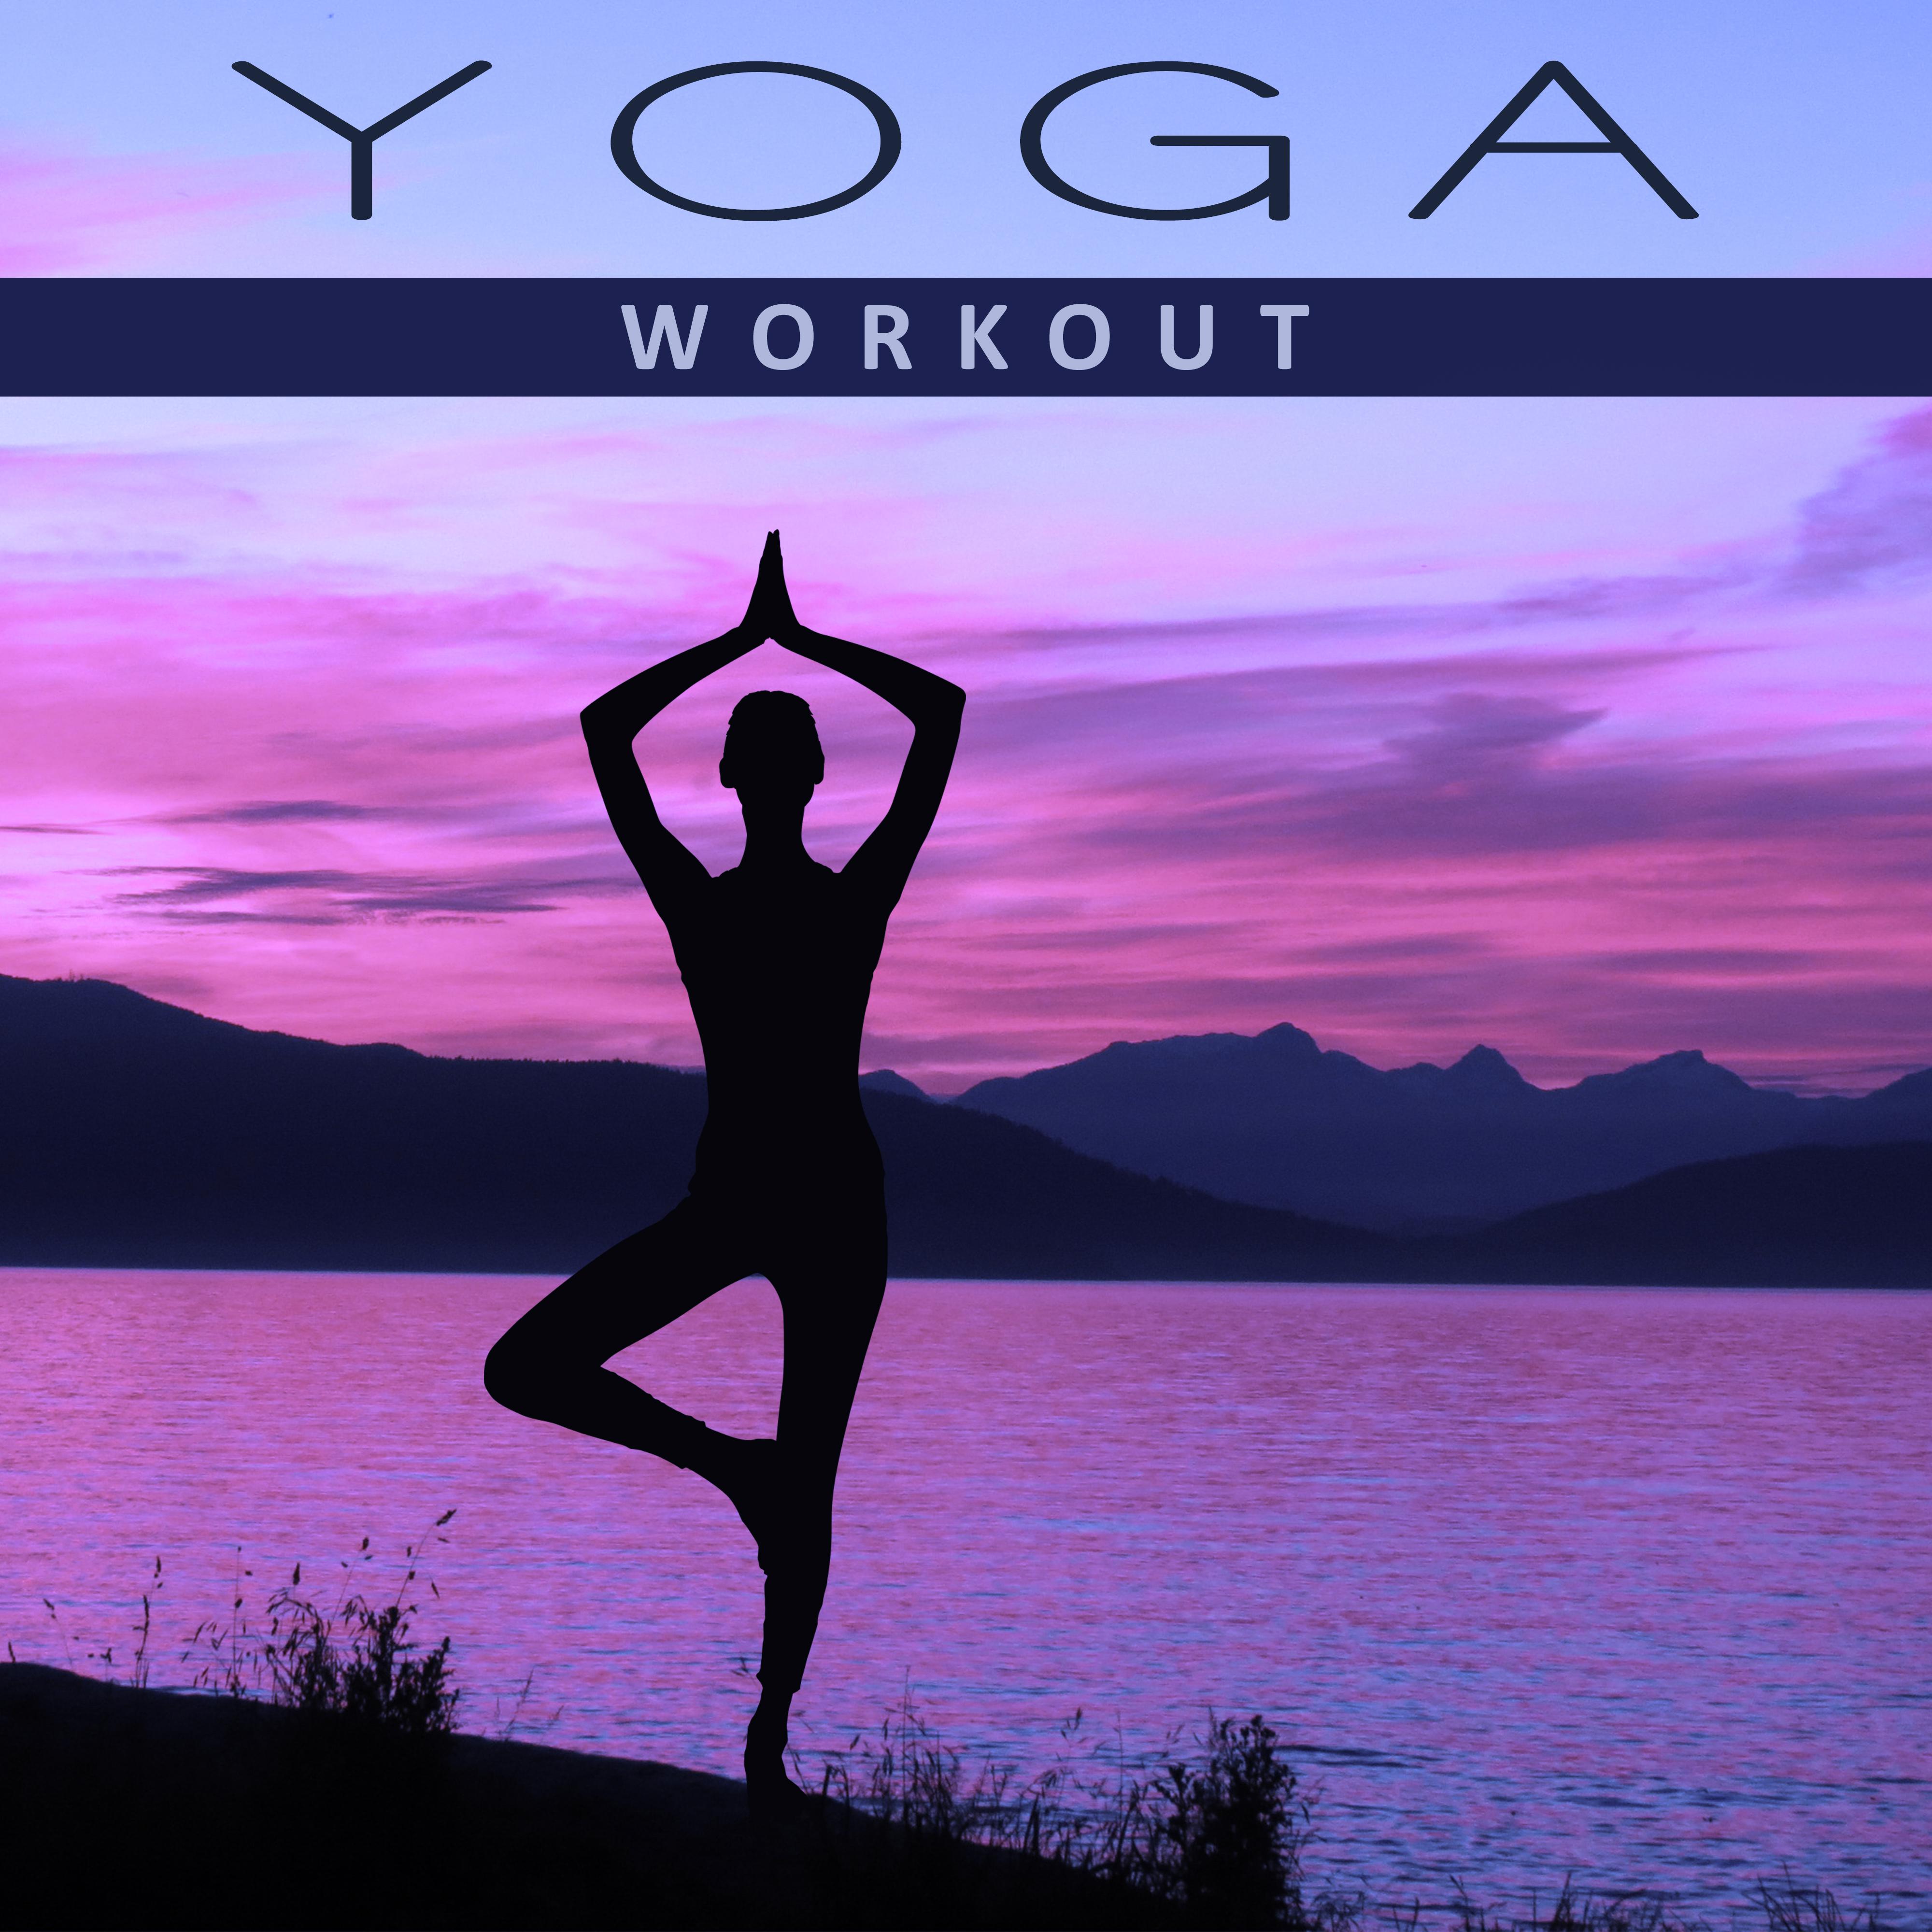 Yoga Workout – New Age Music, Helpful for Meditation, Feel Relax & Zen, Yoga Music